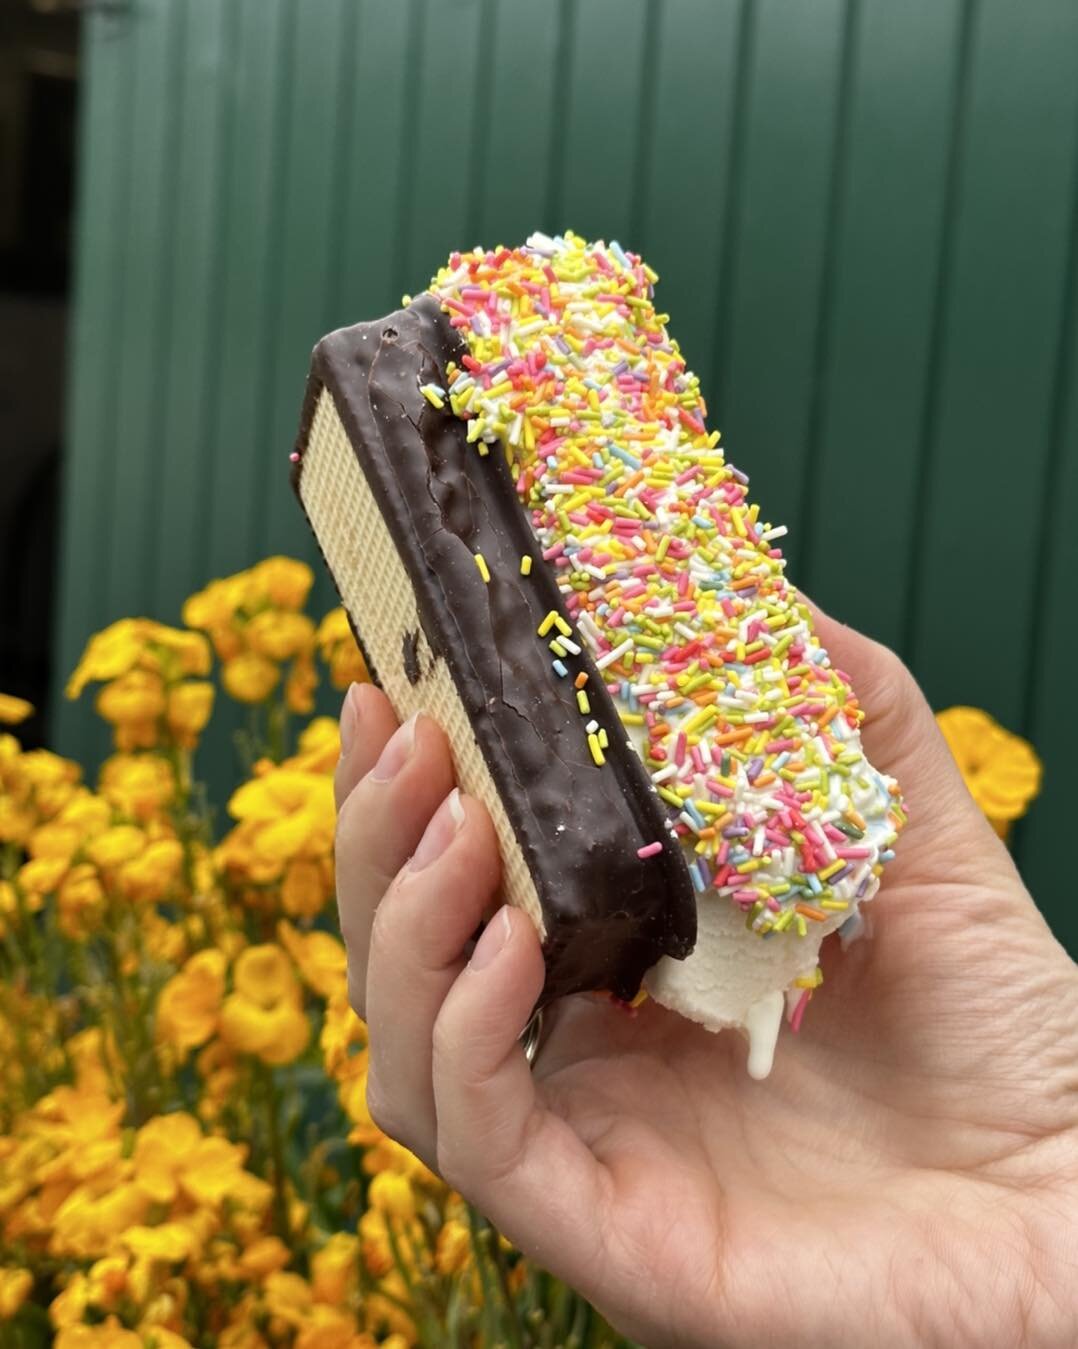 There&rsquo;s still time for an Ice Cream Slider today 🙌🍦

Here until 5.30pm today 🍦